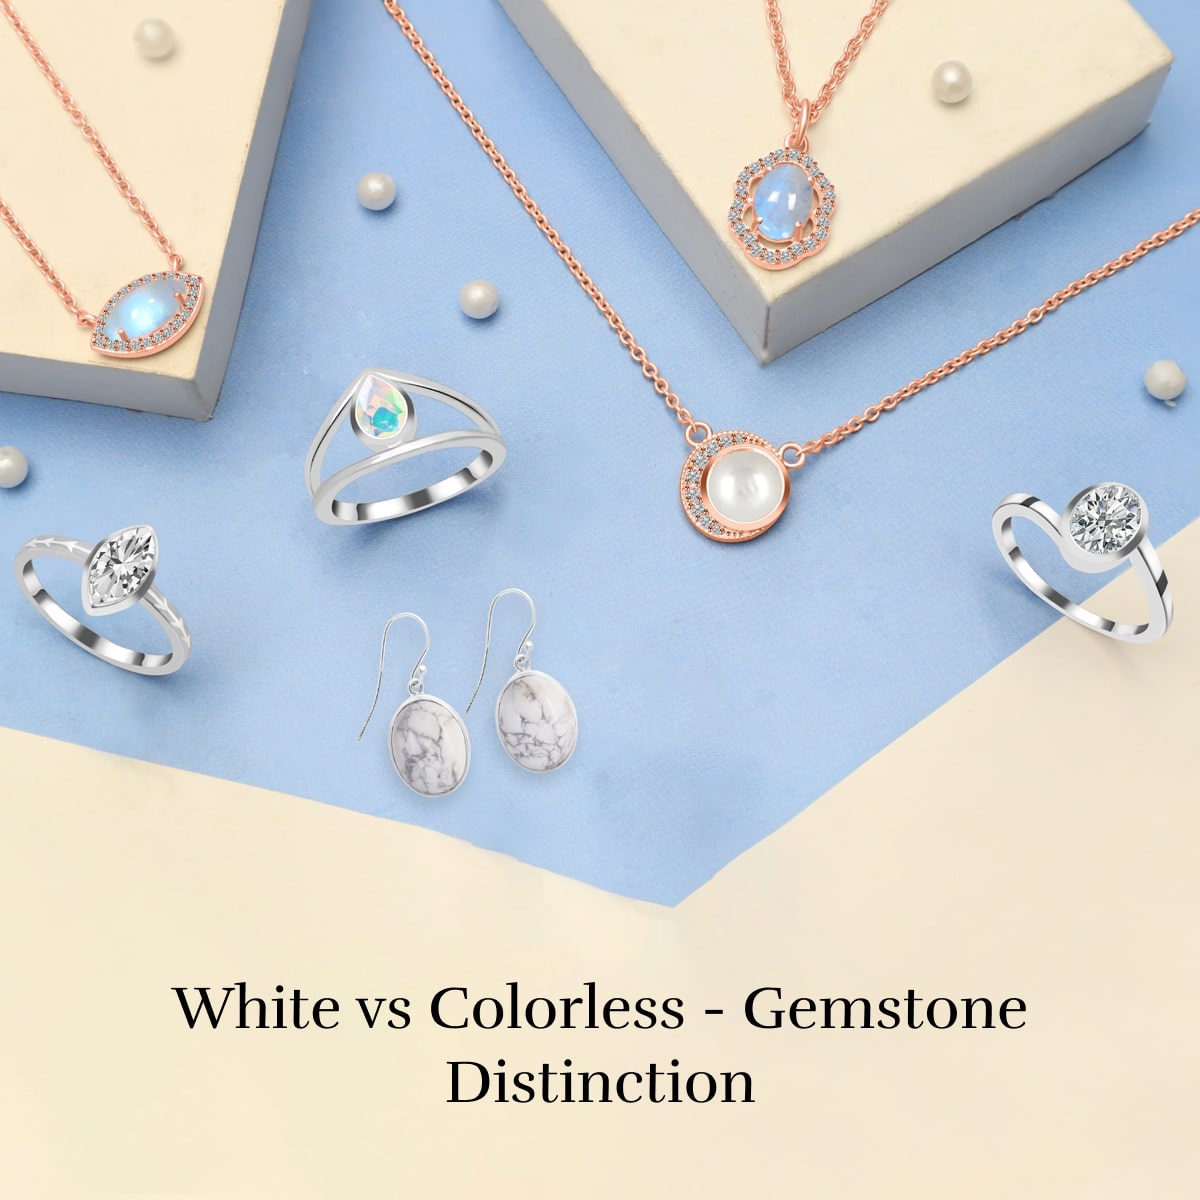 White and Colourless Gemstones